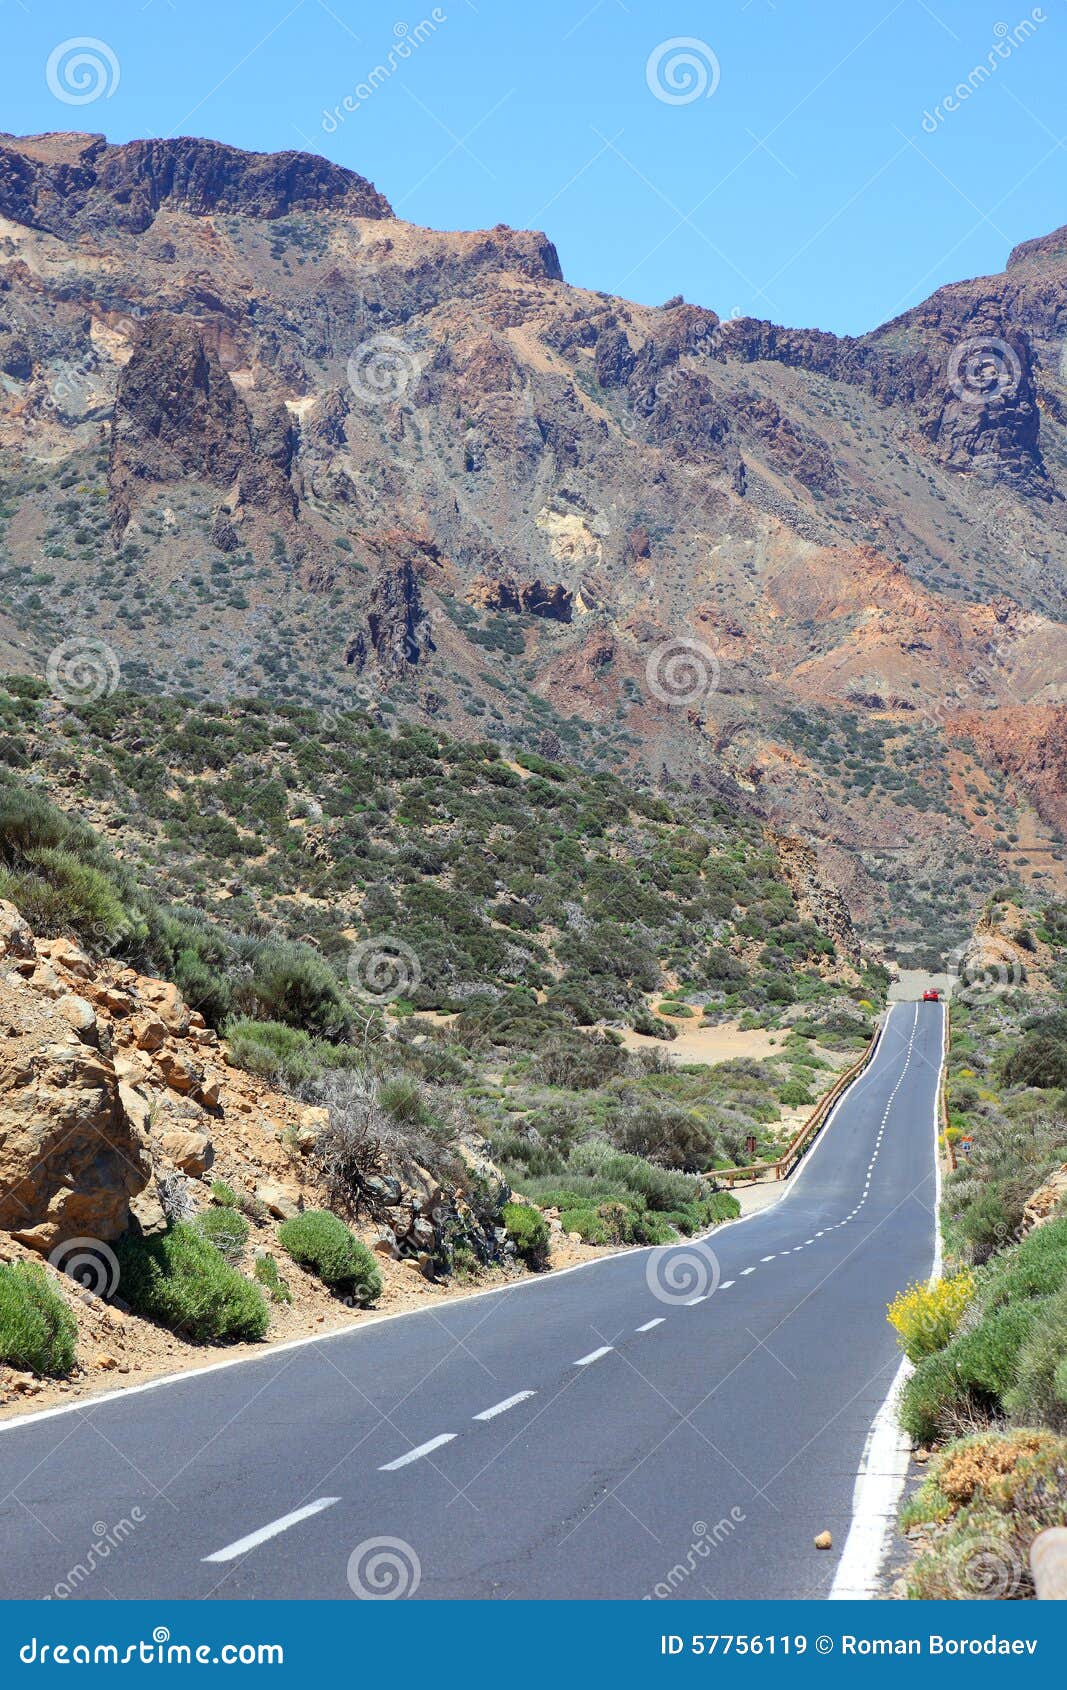 road in desert highway travel landscape blue sky trip sand mountains volcanic volcano rural lane route sun drive nature rock dry